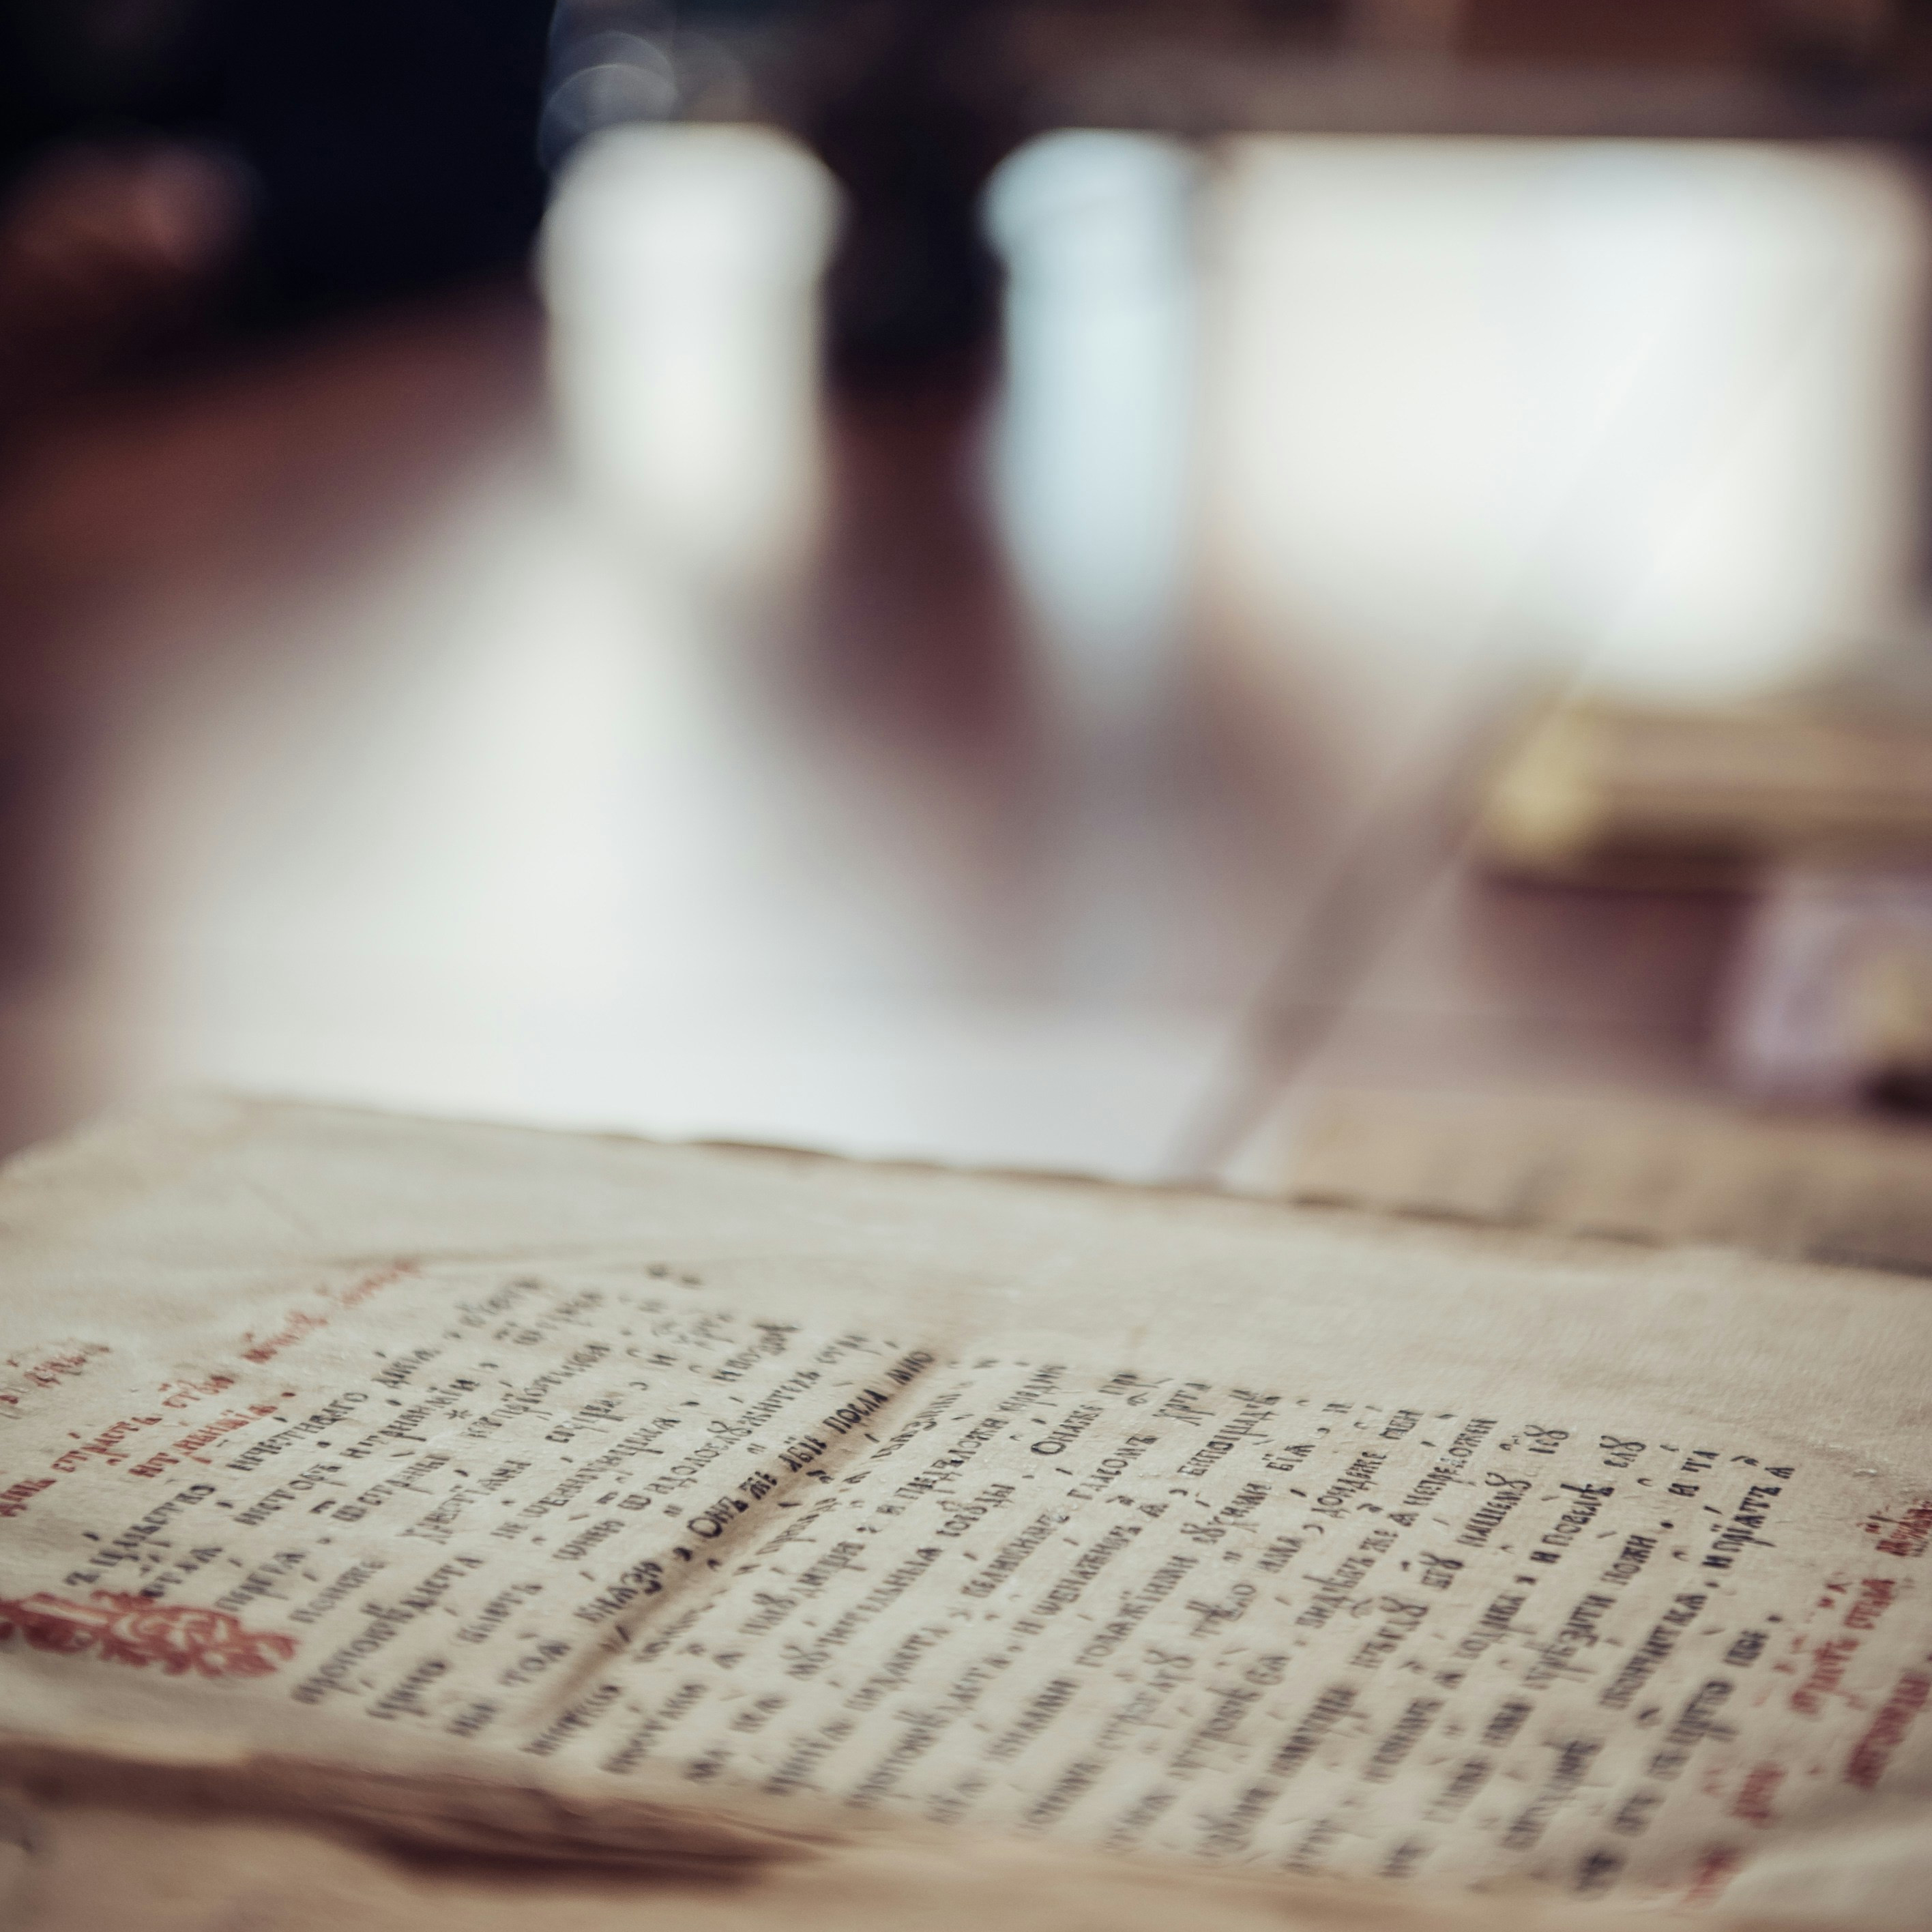 A closeup of an ancient manuscript on the table, with a blurred background and soft lighting